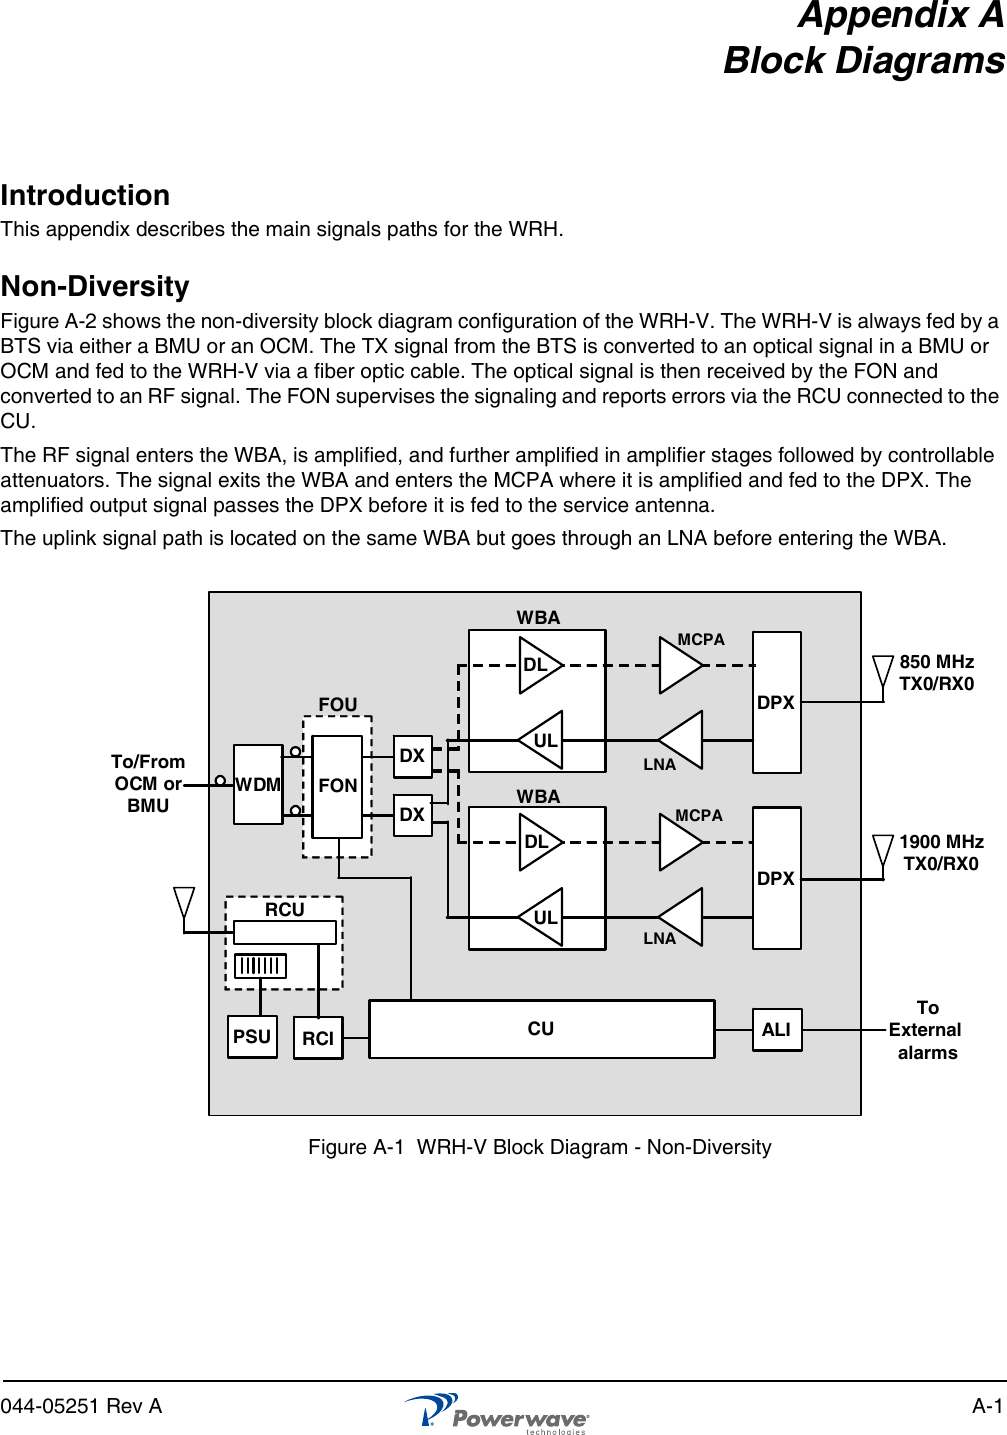 044-05251 Rev A A-1Appendix ABlock DiagramsIntroductionThis appendix describes the main signals paths for the WRH.Non-DiversityFigure A-2 shows the non-diversity block diagram configuration of the WRH-V. The WRH-V is always fed by a BTS via either a BMU or an OCM. The TX signal from the BTS is converted to an optical signal in a BMU or OCM and fed to the WRH-V via a fiber optic cable. The optical signal is then received by the FON and converted to an RF signal. The FON supervises the signaling and reports errors via the RCU connected to the CU.The RF signal enters the WBA, is amplified, and further amplified in amplifier stages followed by controllable attenuators. The signal exits the WBA and enters the MCPA where it is amplified and fed to the DPX. The amplified output signal passes the DPX before it is fed to the service antenna.The uplink signal path is located on the same WBA but goes through an LNA before entering the WBA.Figure A-1  WRH-V Block Diagram - Non-DiversityWDMFOUDXDXDPXDPXWBAWBADLDLULULLNALNAMCPAMCPATo/FromOCM orBMURCURCIPSU CUFONALIToExternal alarms850 MHzTX0/RX01900 MHzTX0/RX0